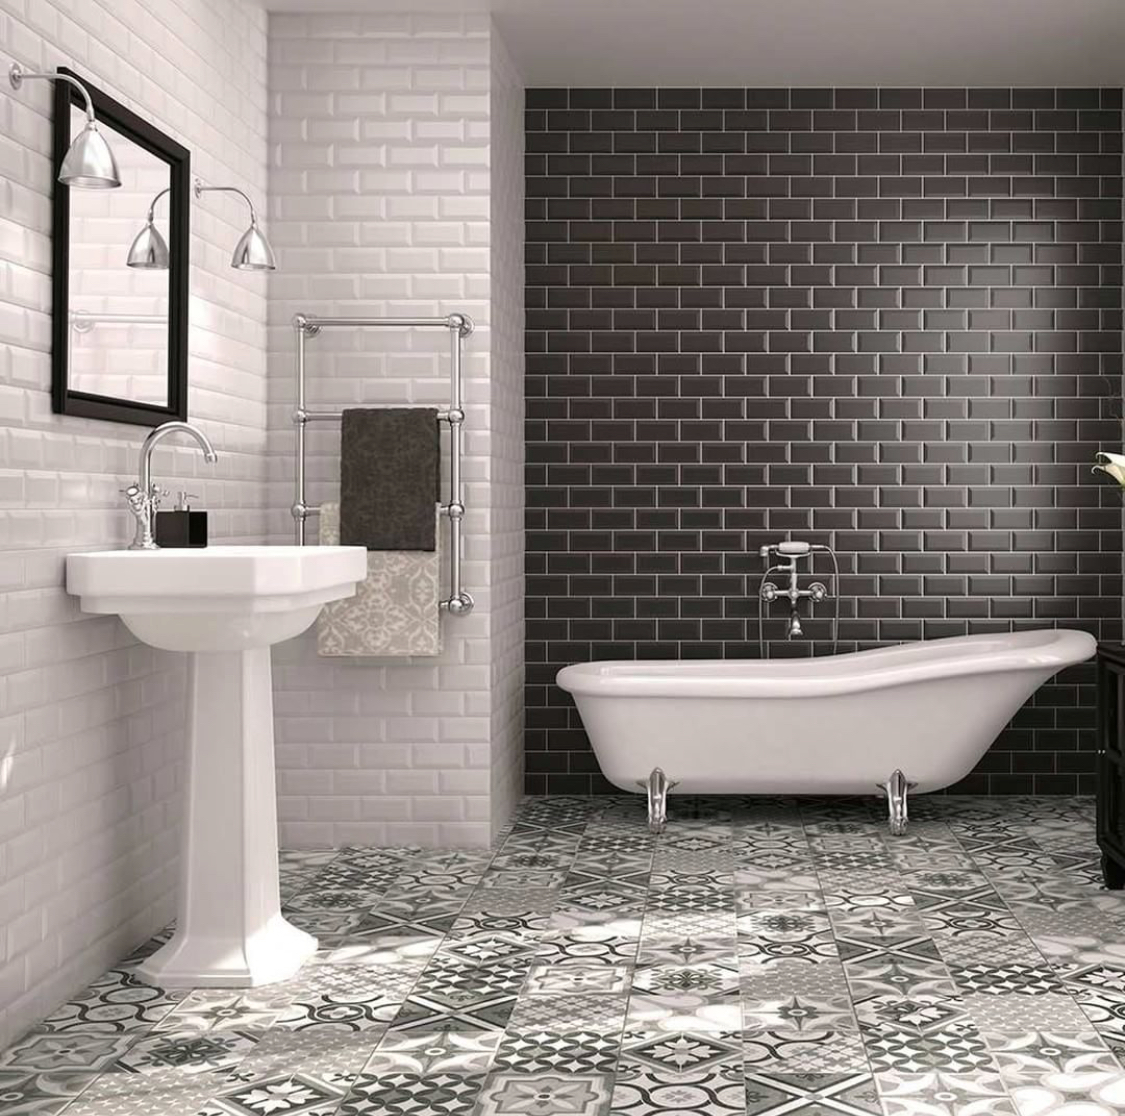 How to Make Your Bathroom a More Comfortable Space